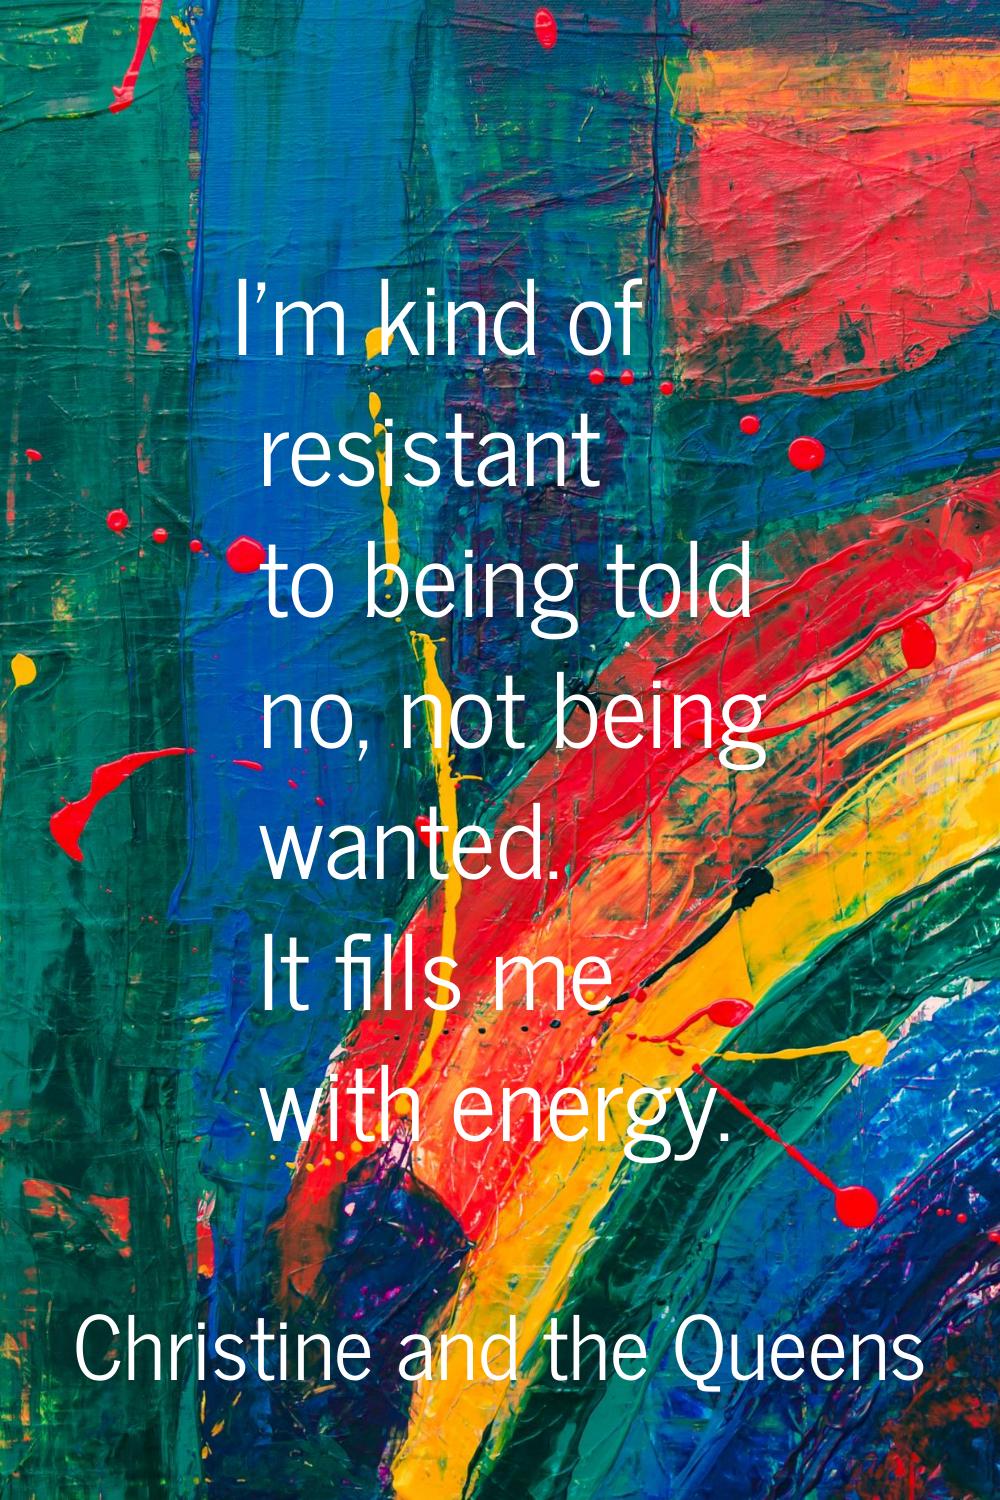 I'm kind of resistant to being told no, not being wanted. It fills me with energy.